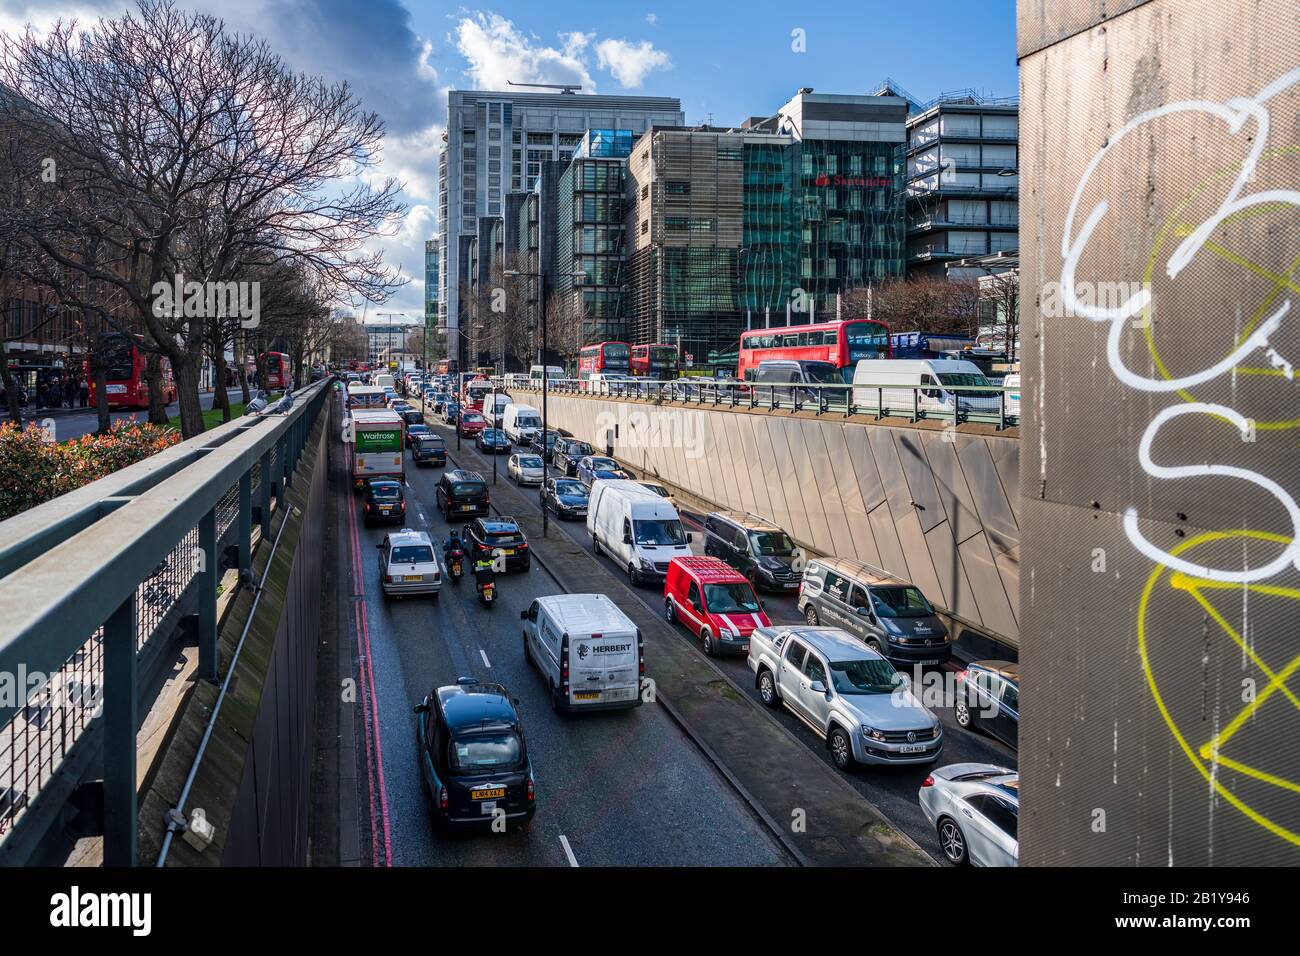 Euston Road Underpass - Rush hour traffic queues to enter and leave the Euston Rd Underpass in Central London. Stock Photo